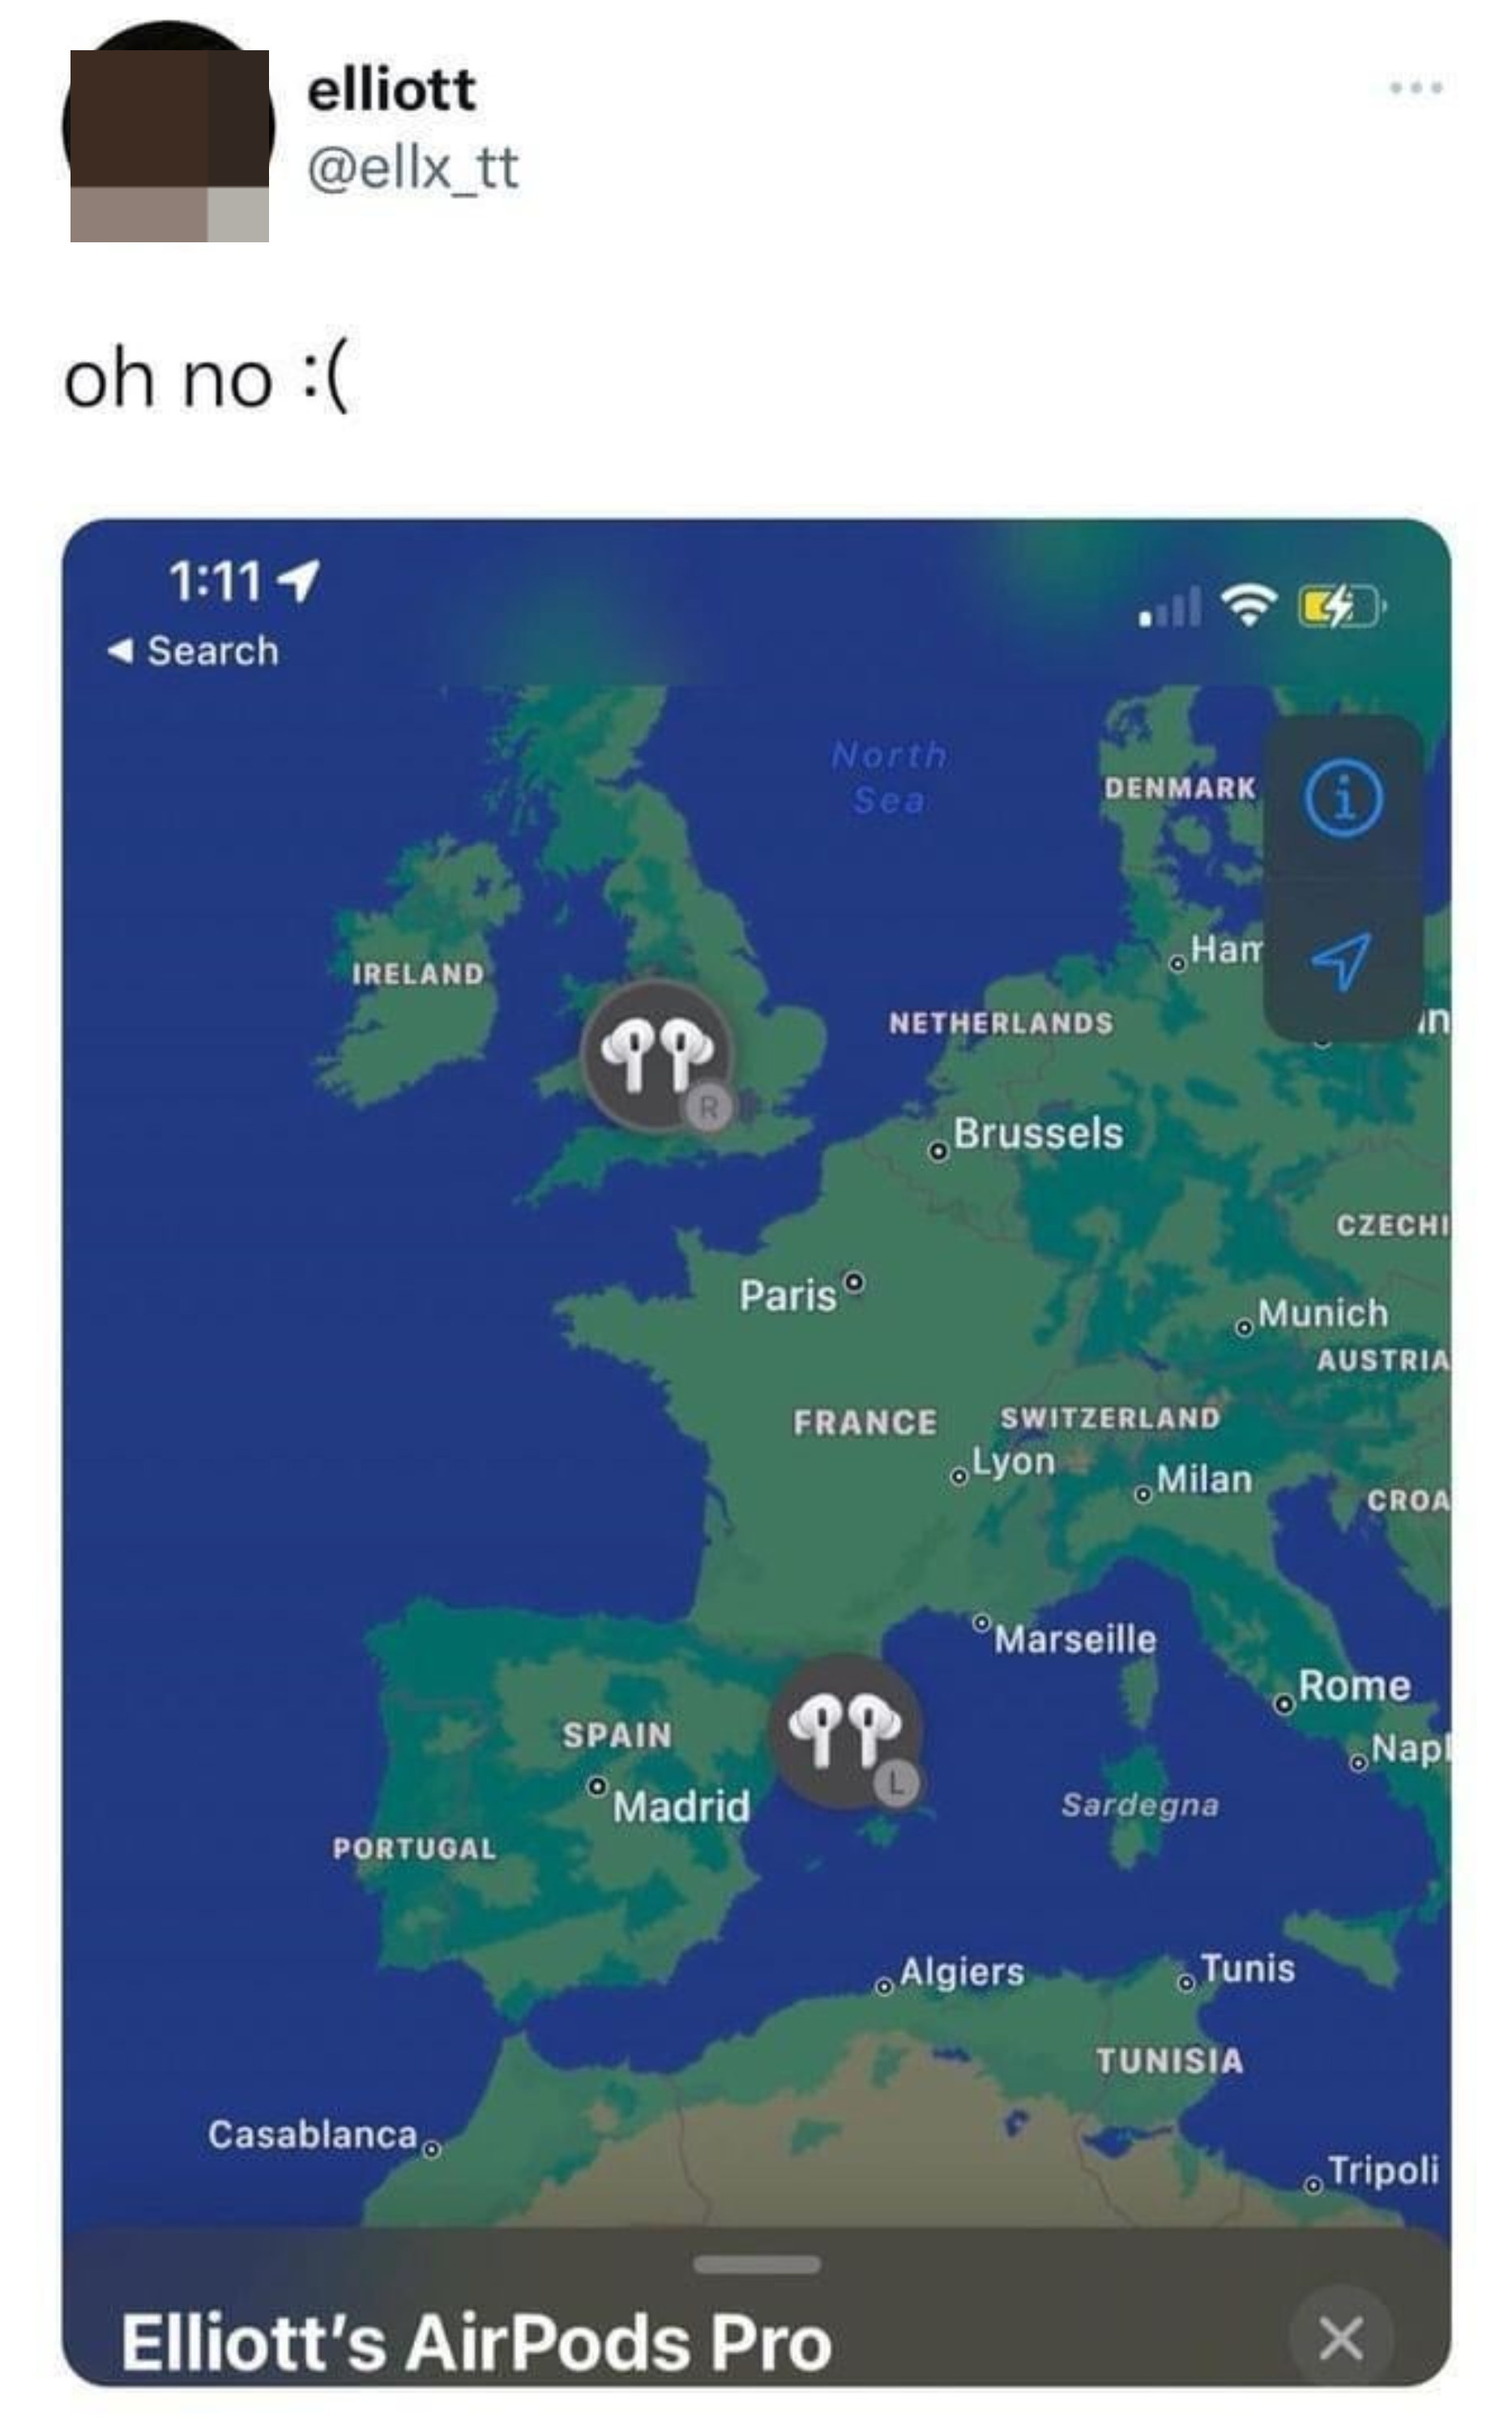 AirPod headphones, one in the UK and one in Italy, seen on a map